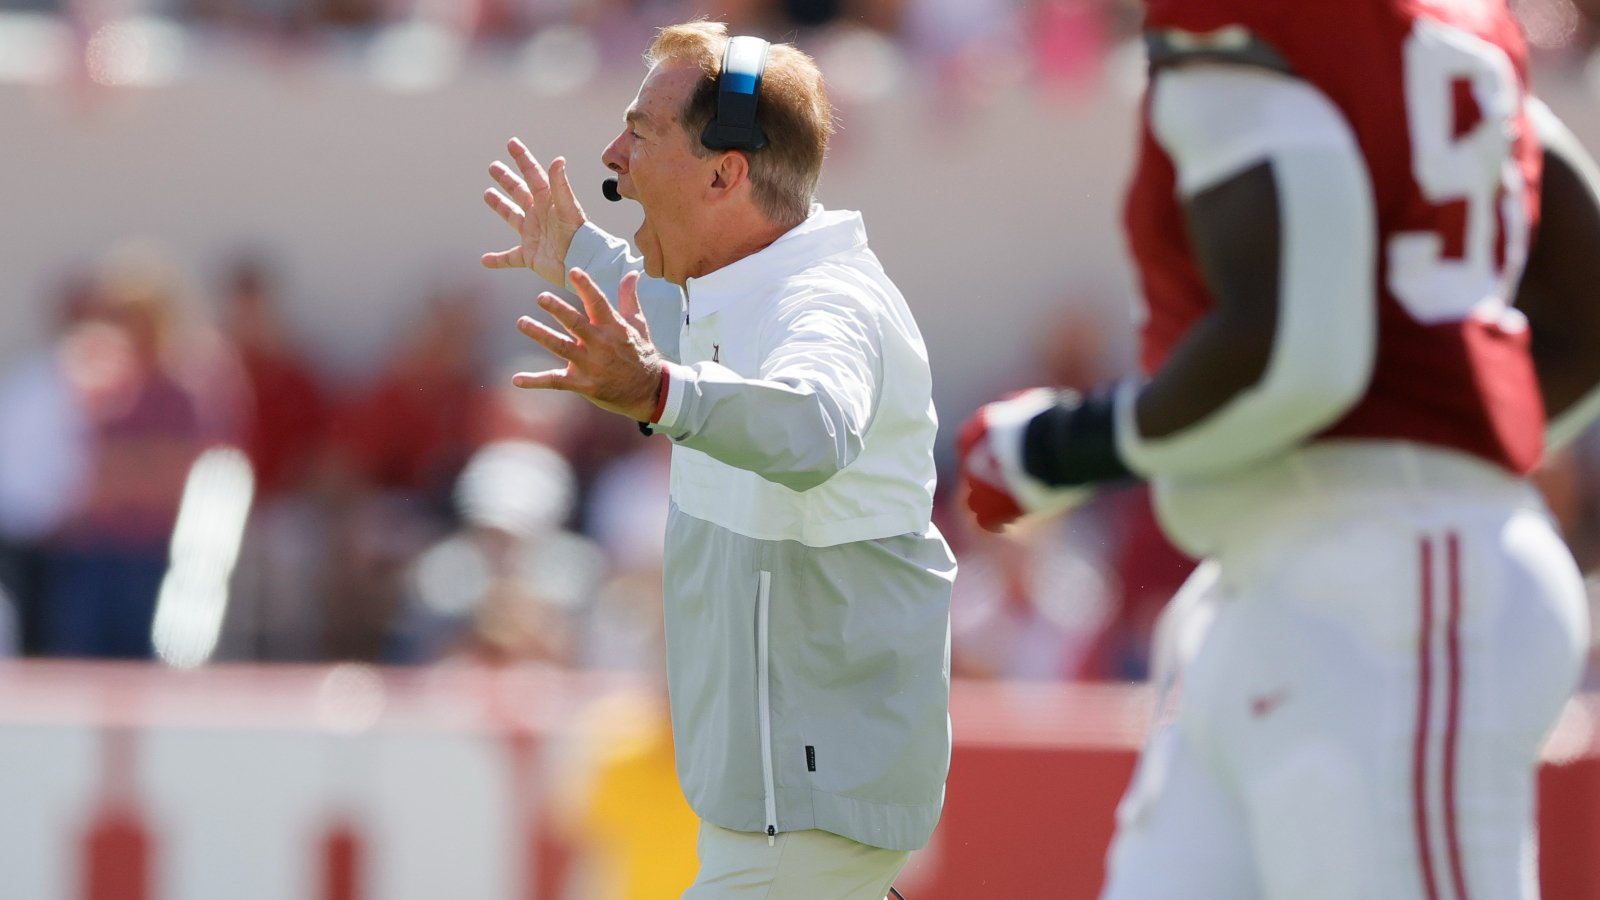 A Very Unhappy Nick Saban Punishes QB That Dropped Ball Short Of Endzone In Most Fitting Way